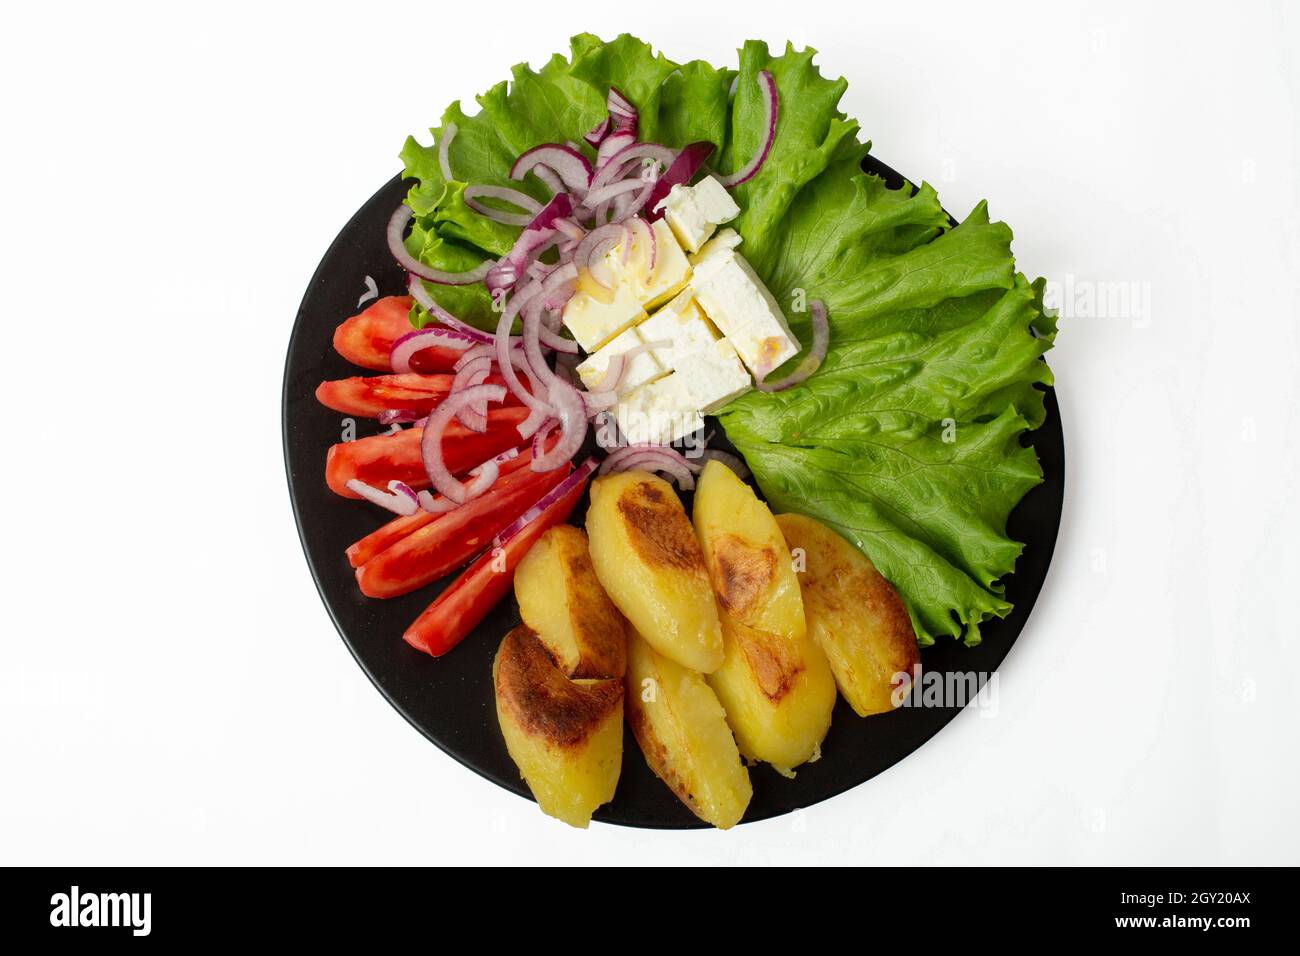 Black plate full of baked potatoes, cottage cheese, sliced tomatoes, sliced red onion, a lettuce leaf and olive oil. Mediterranean food isolated on wh Stock Photo